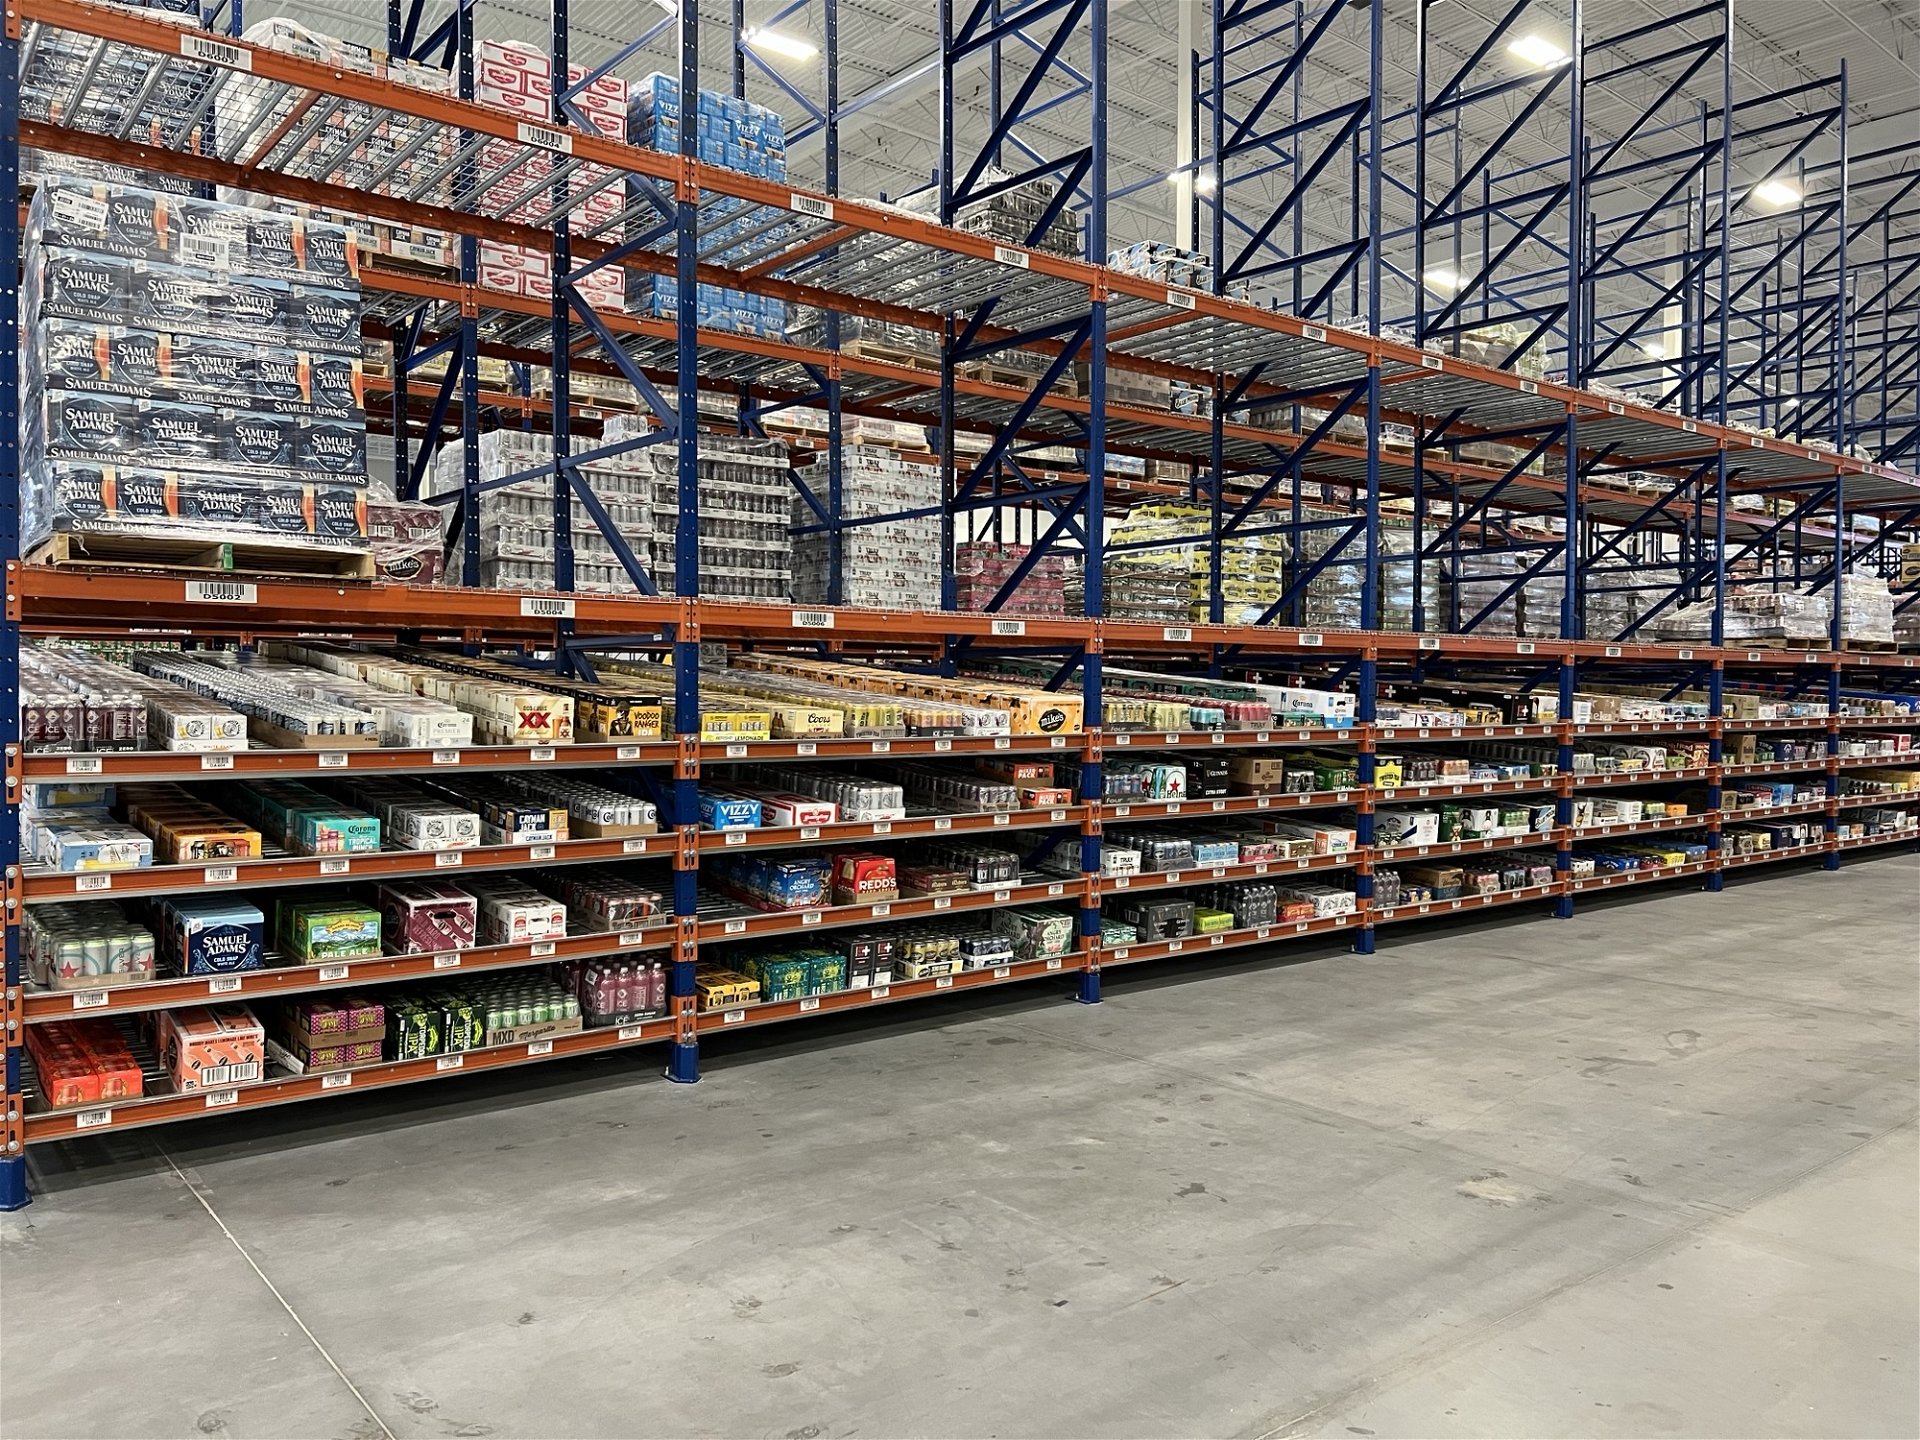 Warehouse with alcoholic beverage products